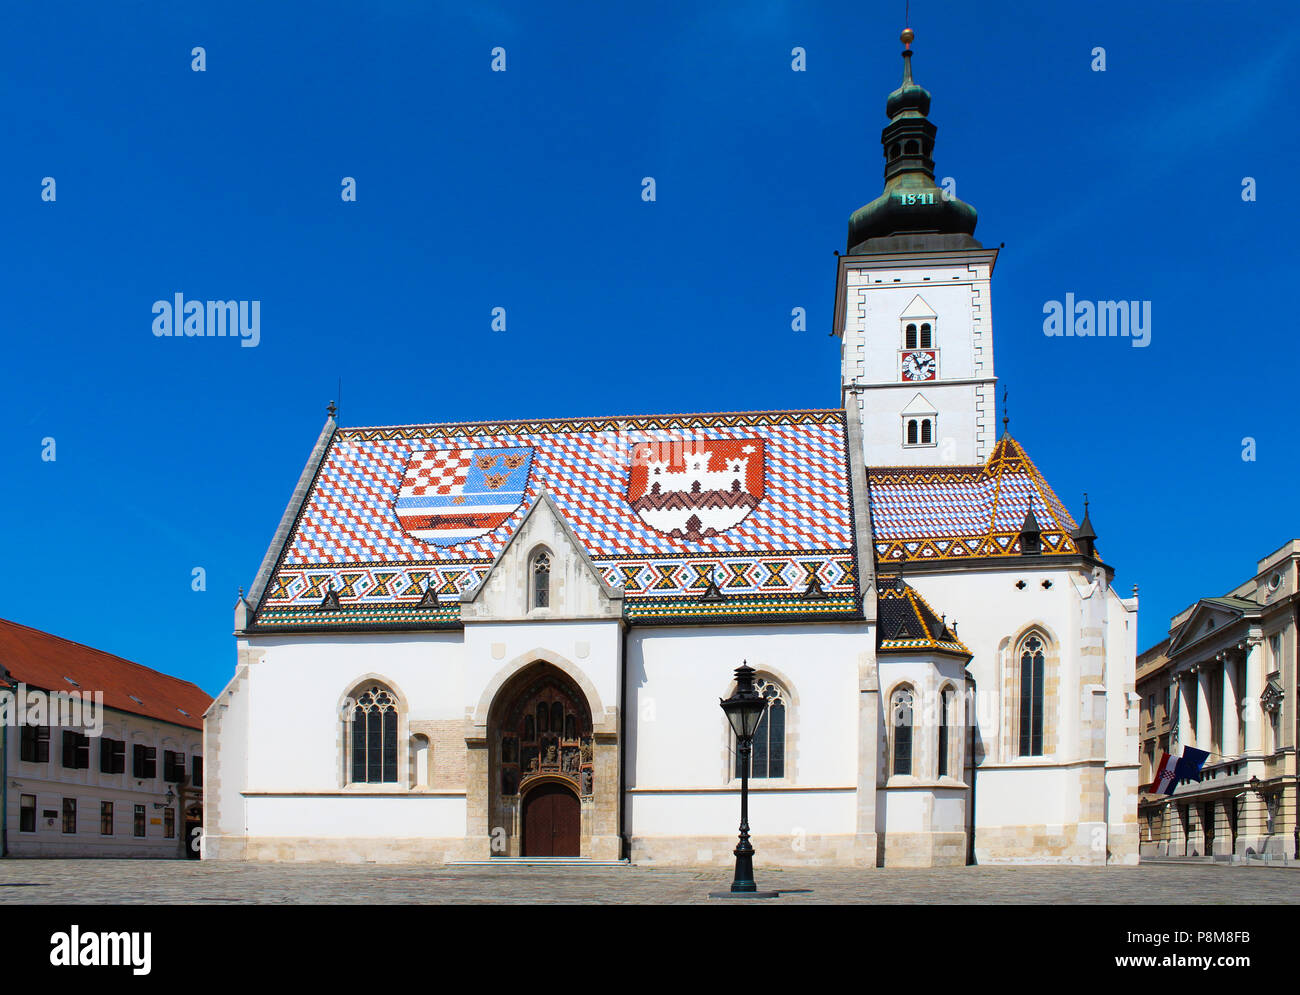 St. Mark's Church, Zagreb. Monumental, medieval-style, Serbian Orthodox church constructed from 1931-1940. Stock Photo